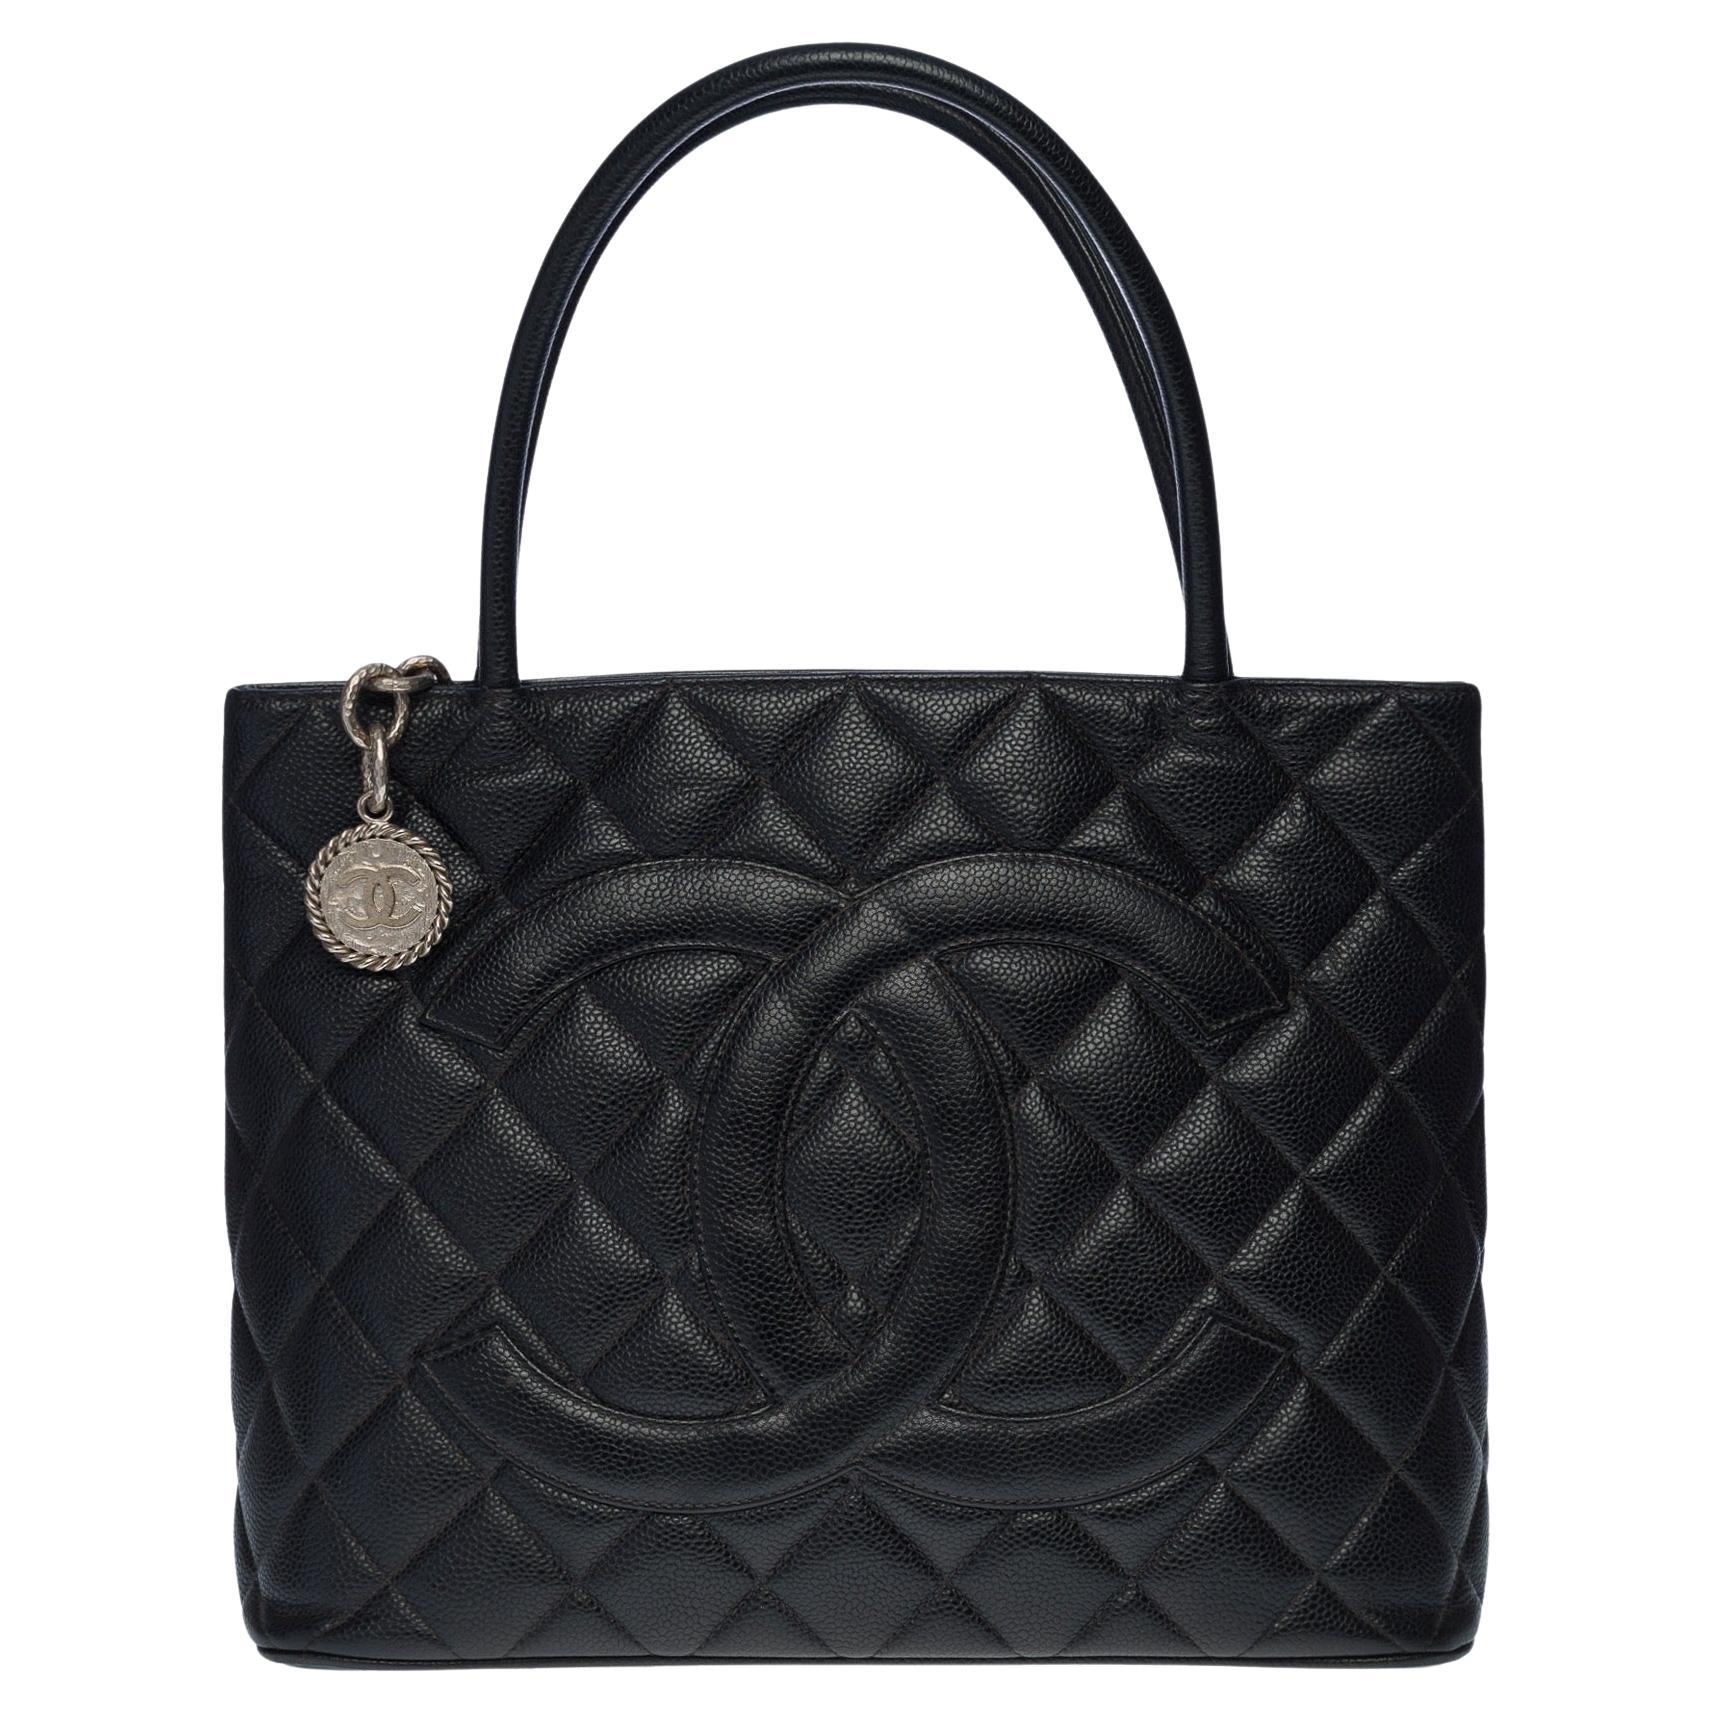 Beautiful Chanel Cabas Medallion bag in black caviar leather, SHW For Sale